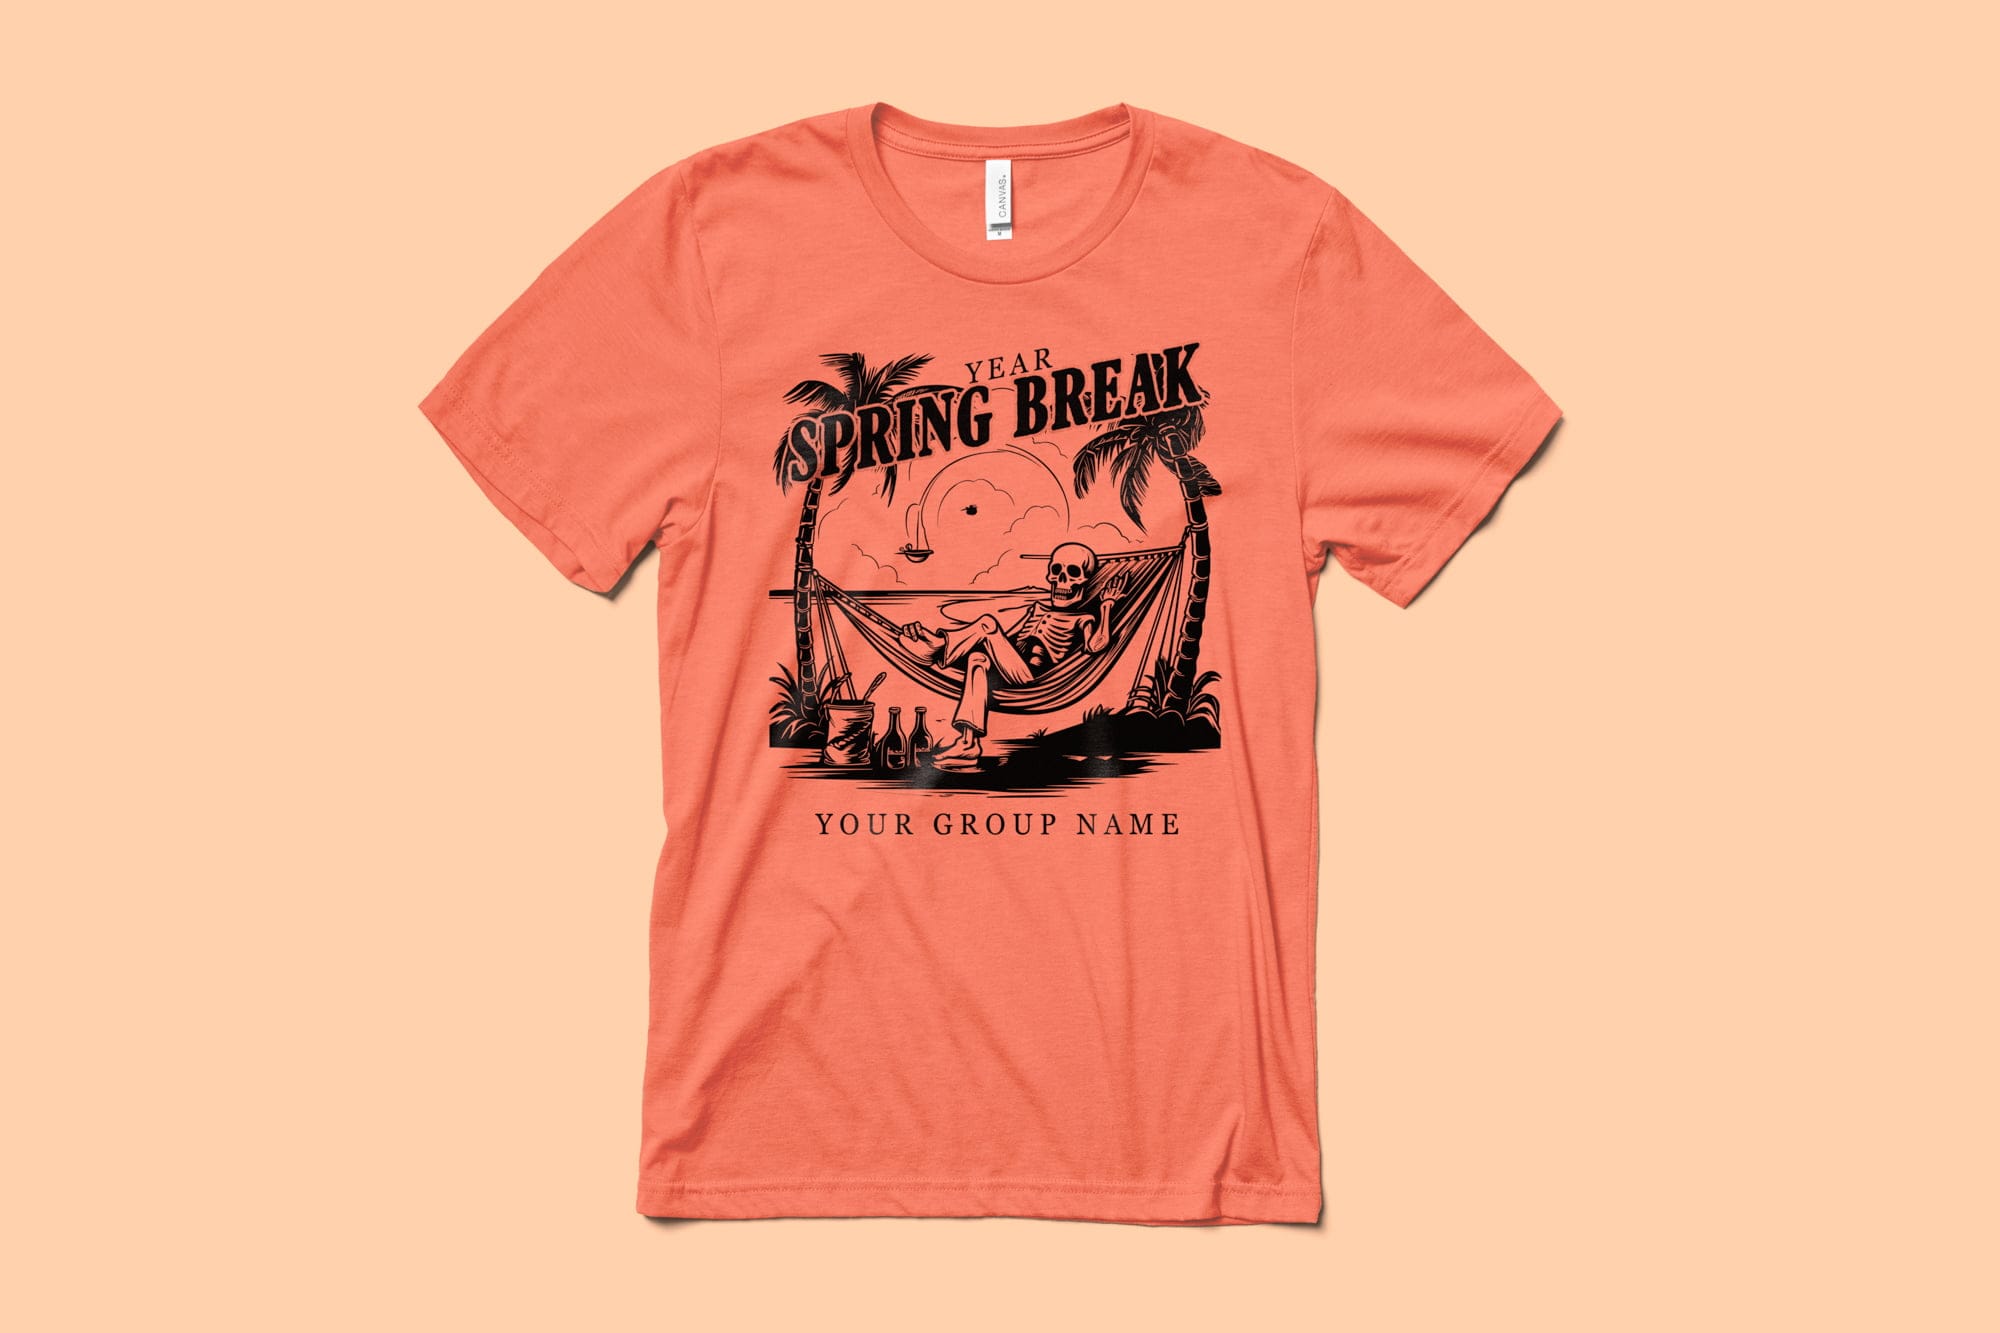 A bright orange shirt that has a one color design of a skeleton relaxing in a hammock on the beach.